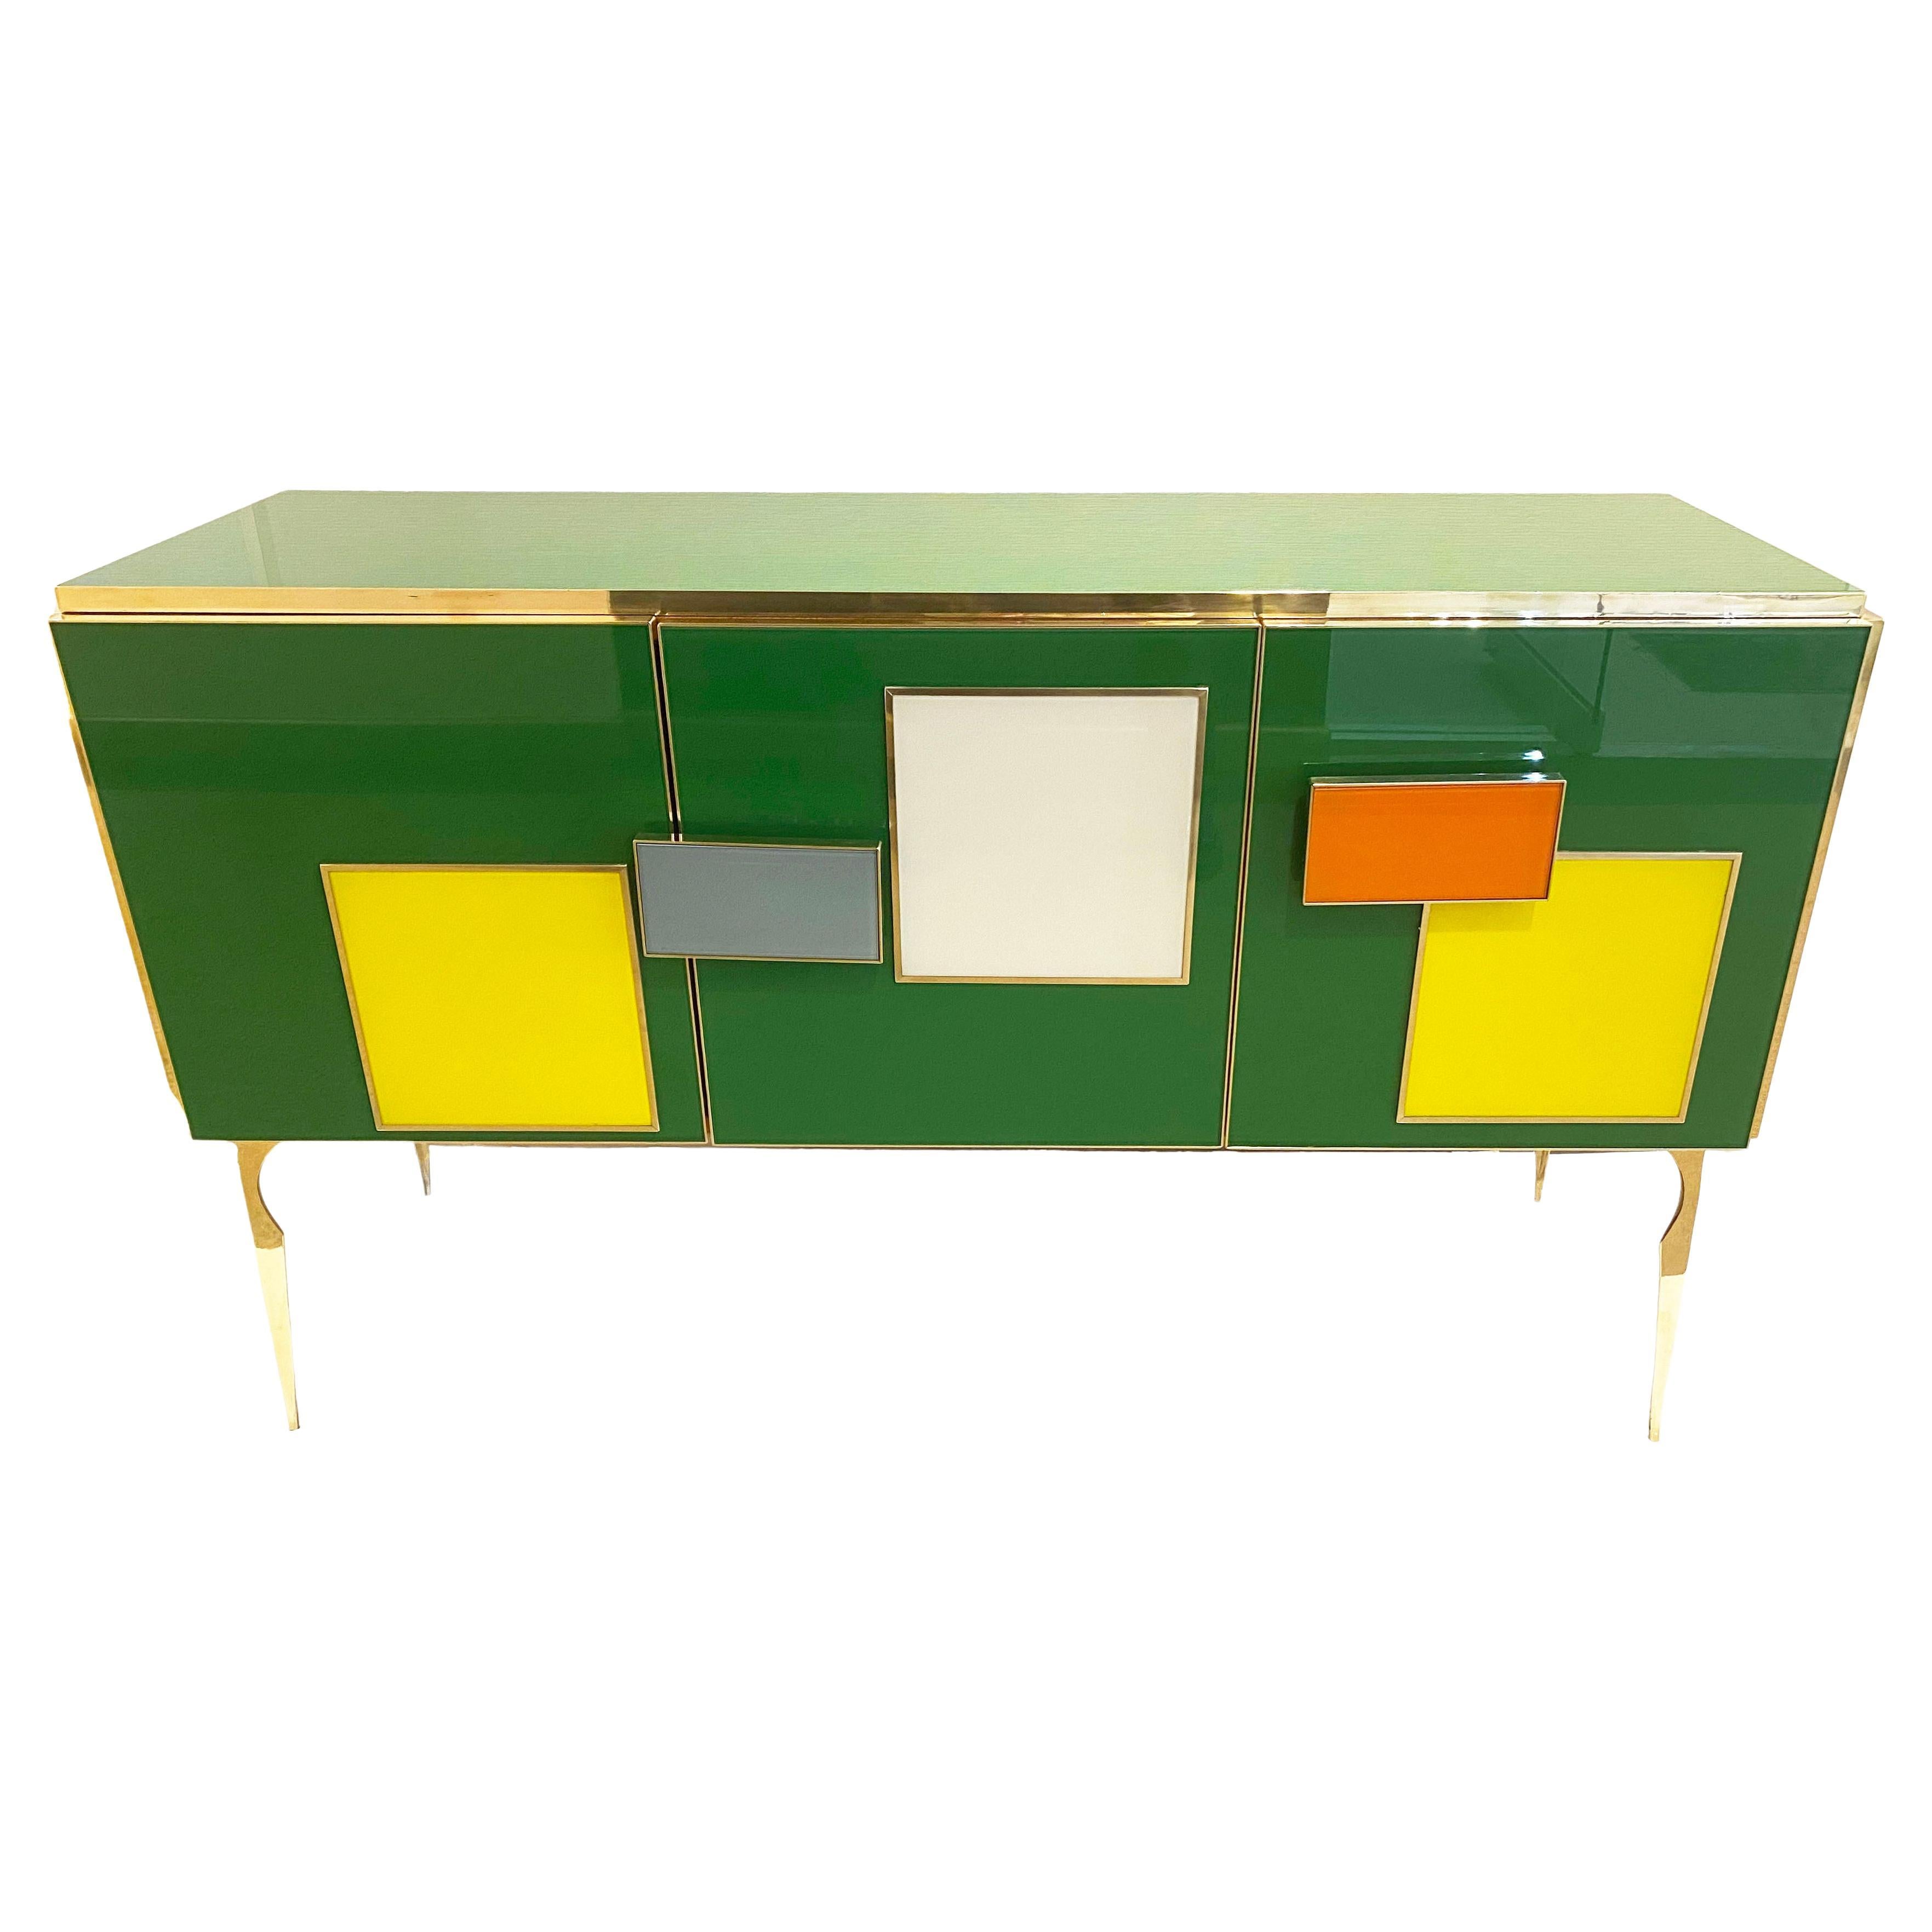 Bespoke customizable 3-door modern cabinet sideboard, entirely handcrafted in Italy with Memphis inspiration for the attractive colorful geometric decor with raised pattern and handles. The surround is decorated with art glass in a striking